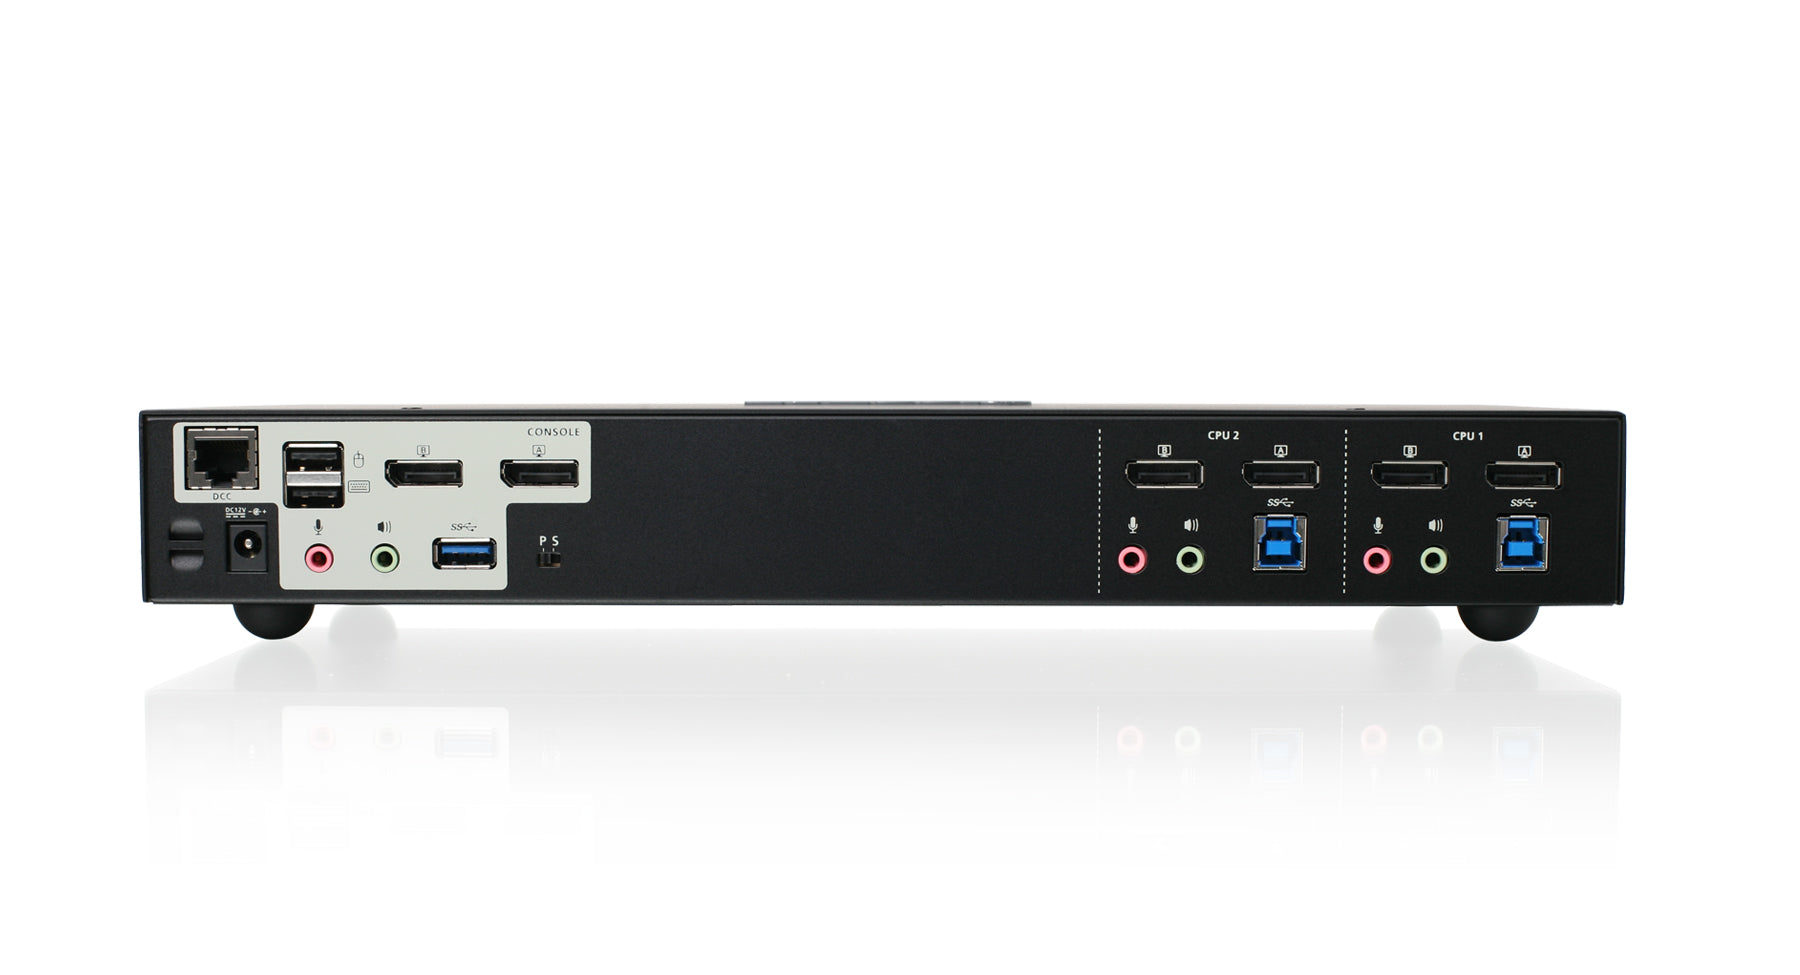 2-Port 4K Dual View DisplayPort KVMP with USB 3.0 and Audio. KVM switch only